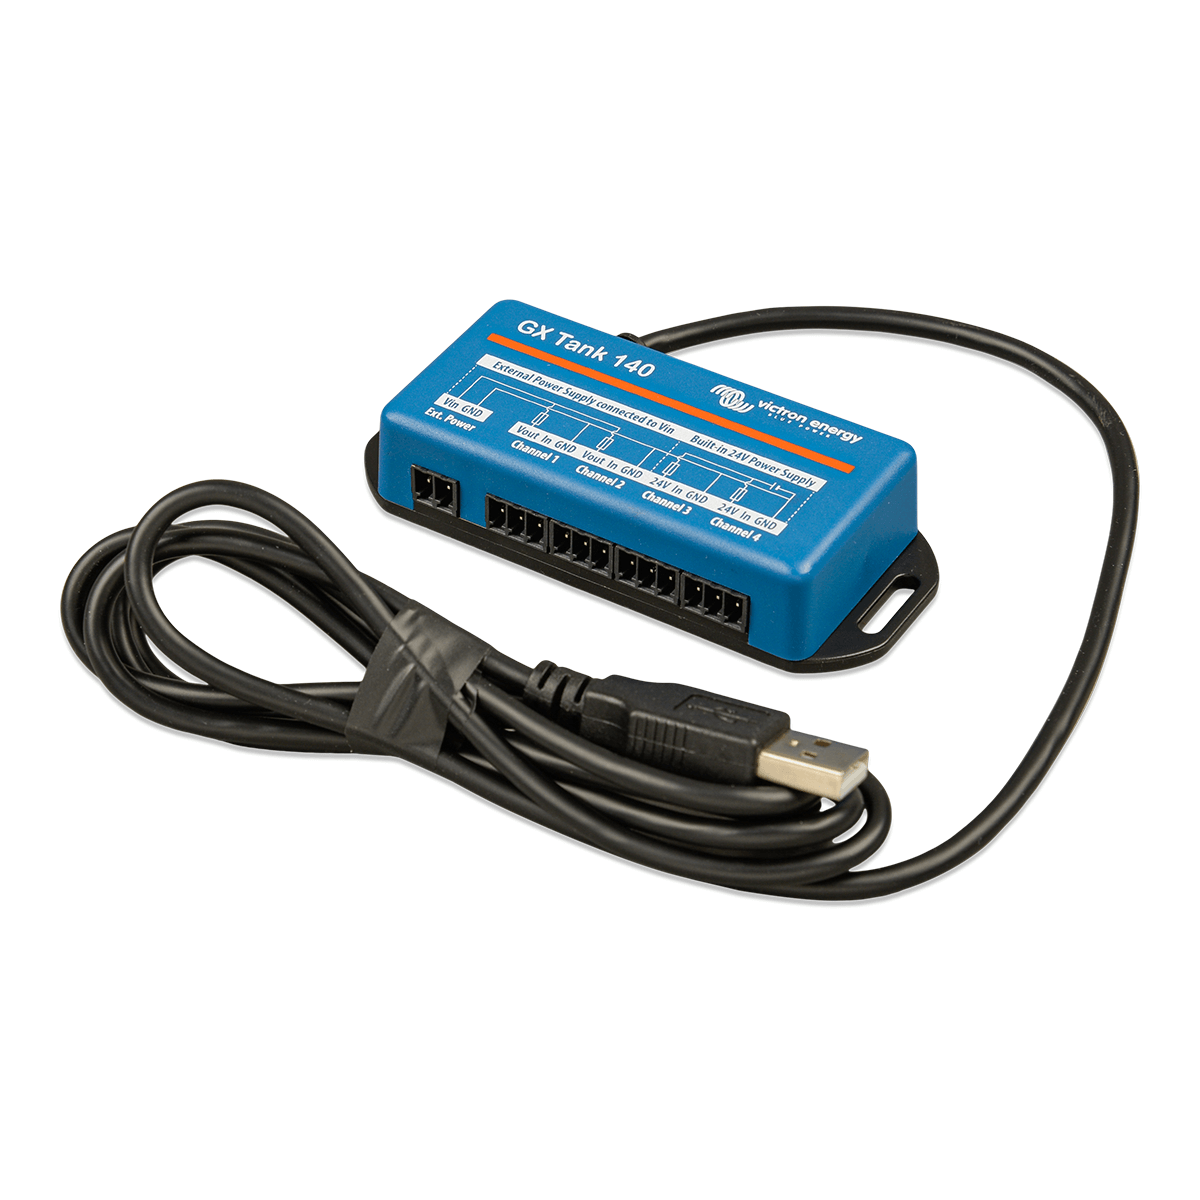 The blue electrical module, labeled "Victron GX Tank 140 - Voltage Sensor for Tank Level Monitoring," comes with a USB cable and features several ports along with a detailed diagram on top.